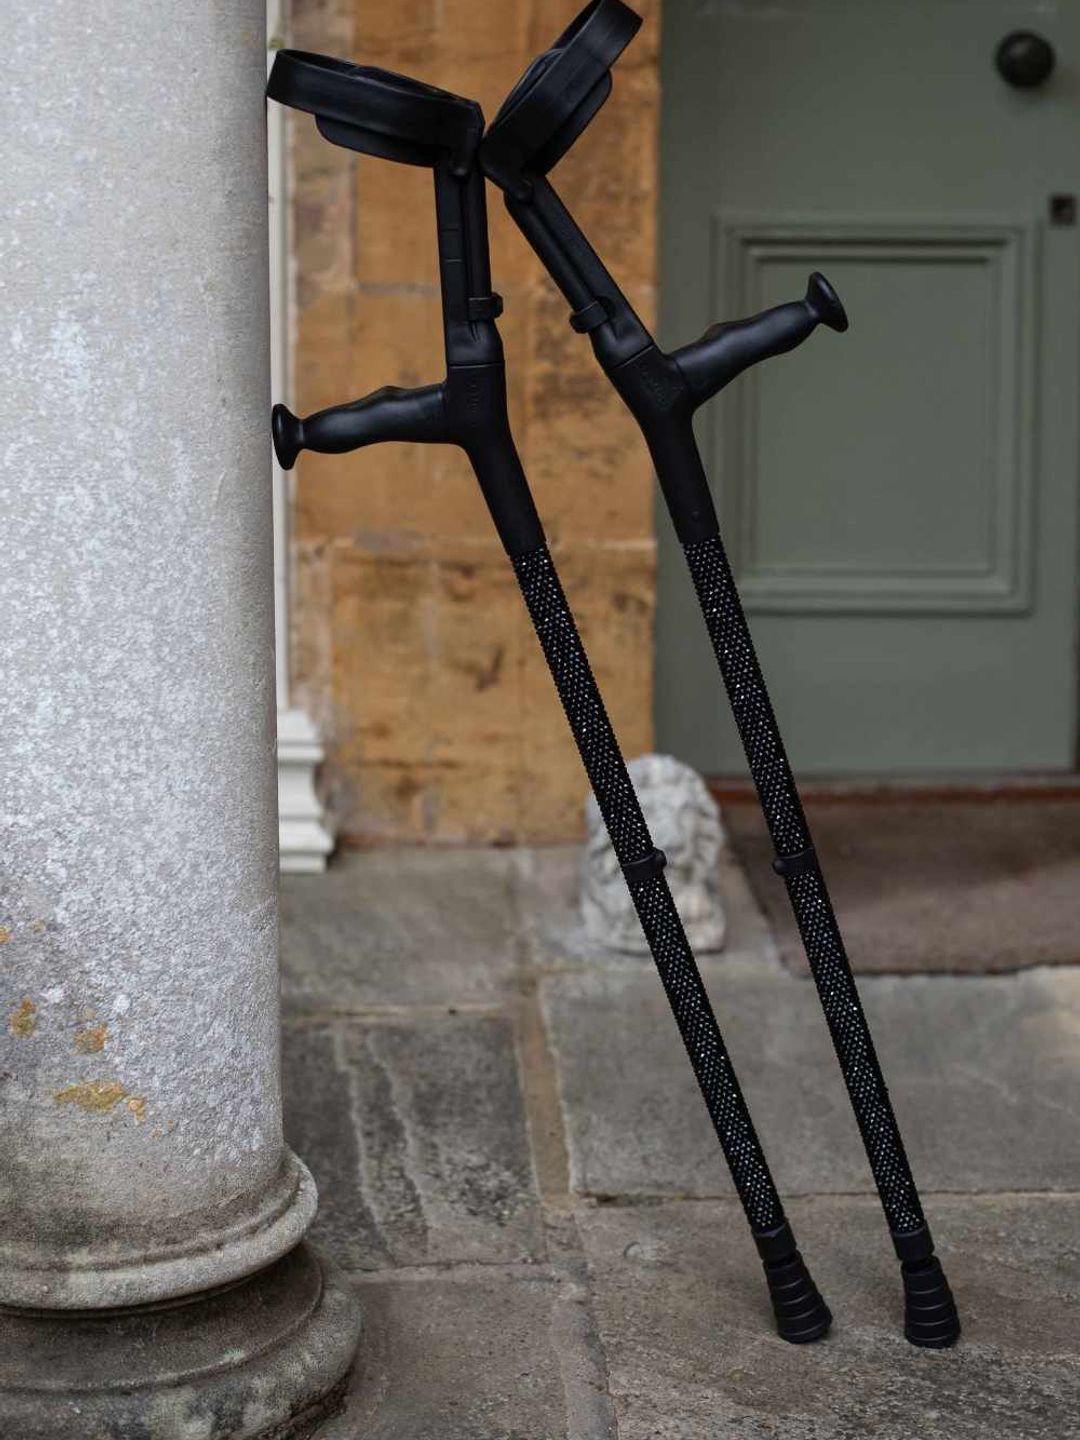 Cool Crutches also offer black diamanté crutches, hand-embellished with over 2000 zodiac rhinestones